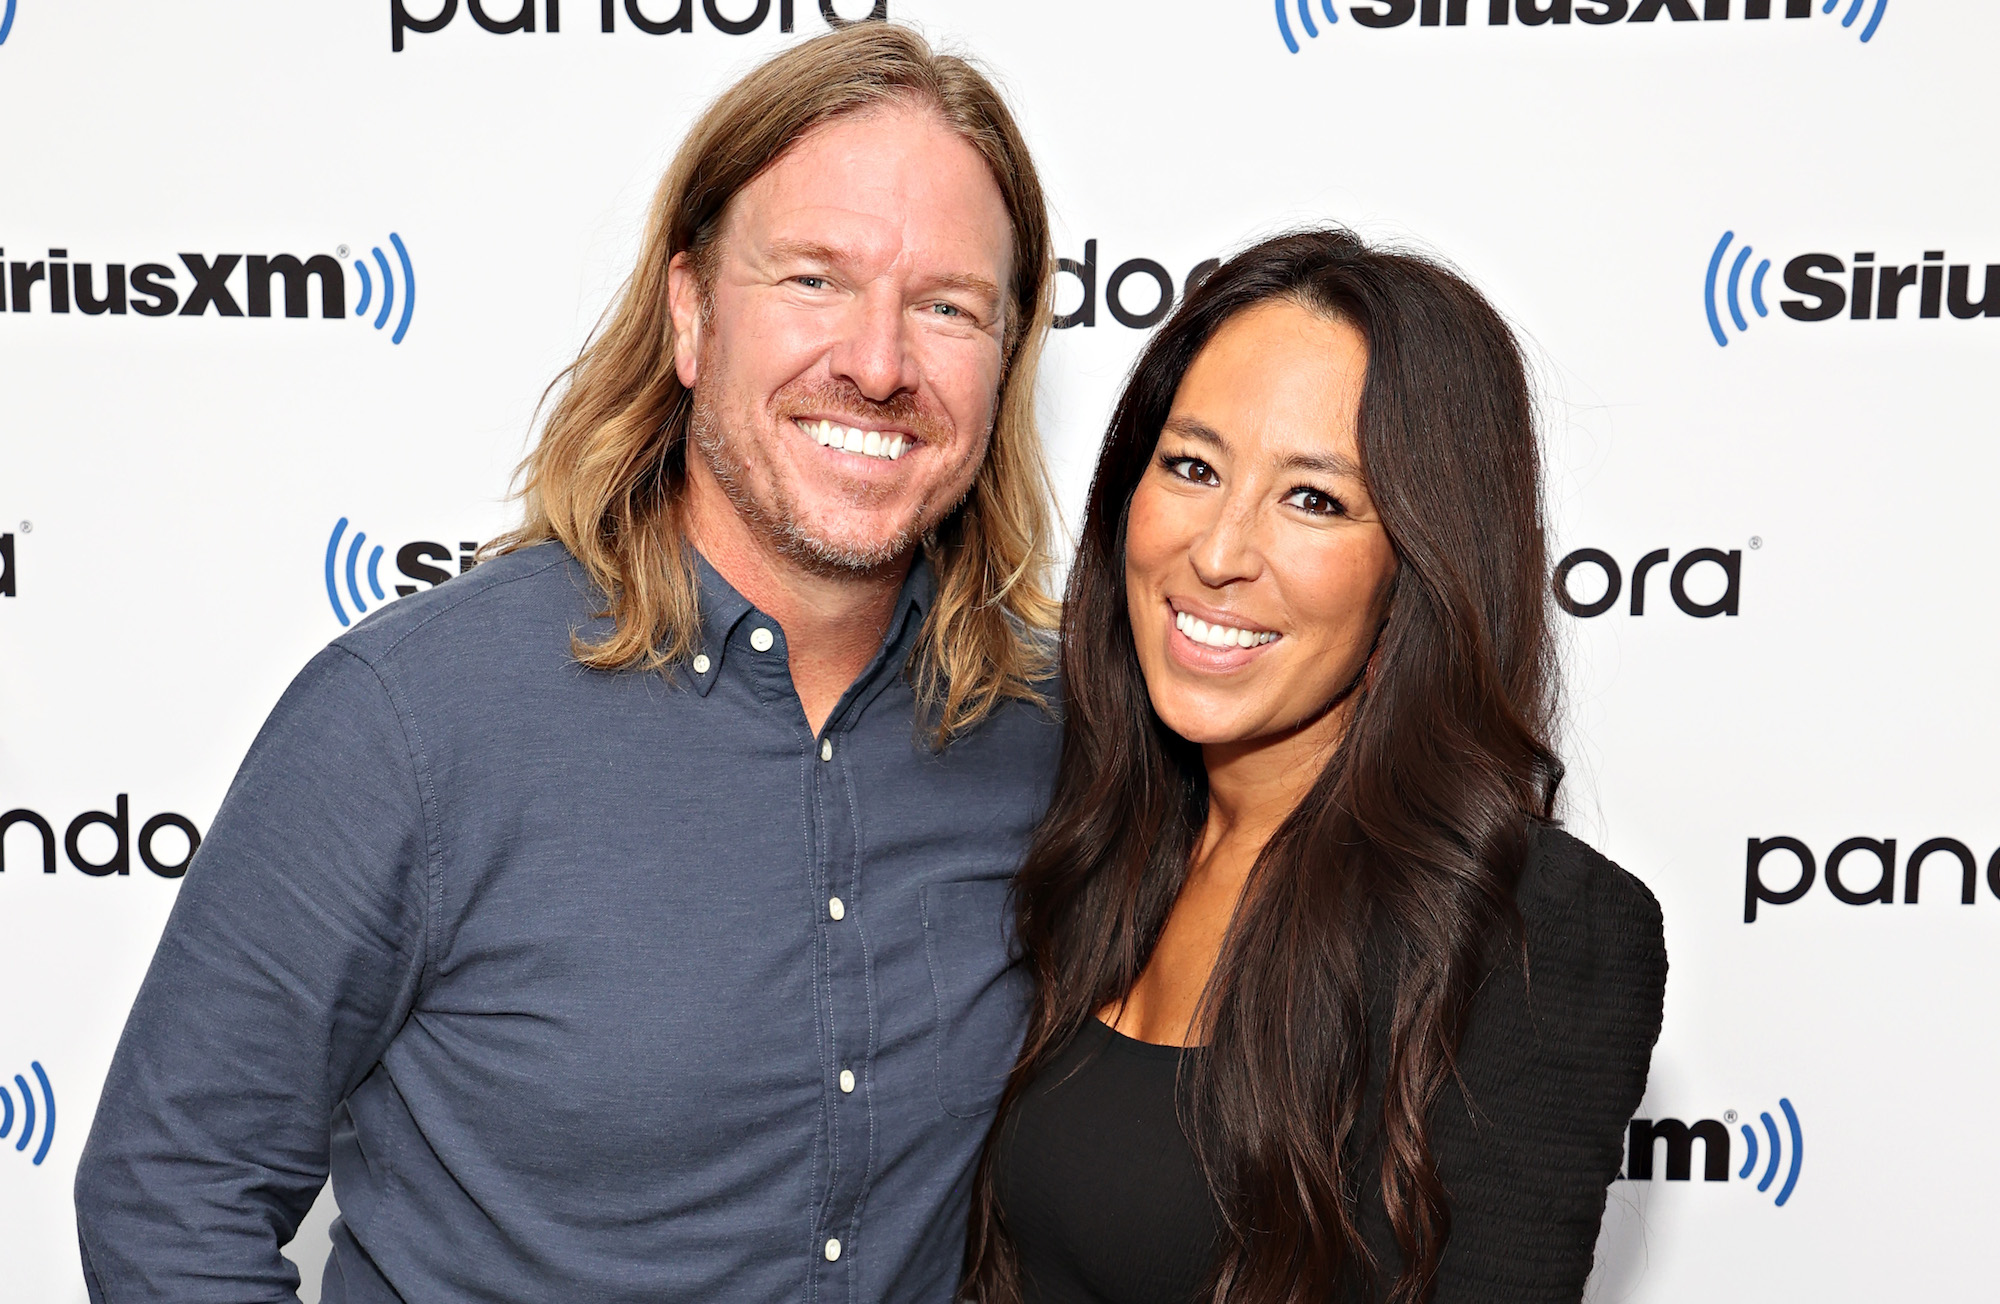 Chip and Joanna Gaines visiting the SiriusXM Studios in New York City in 2021